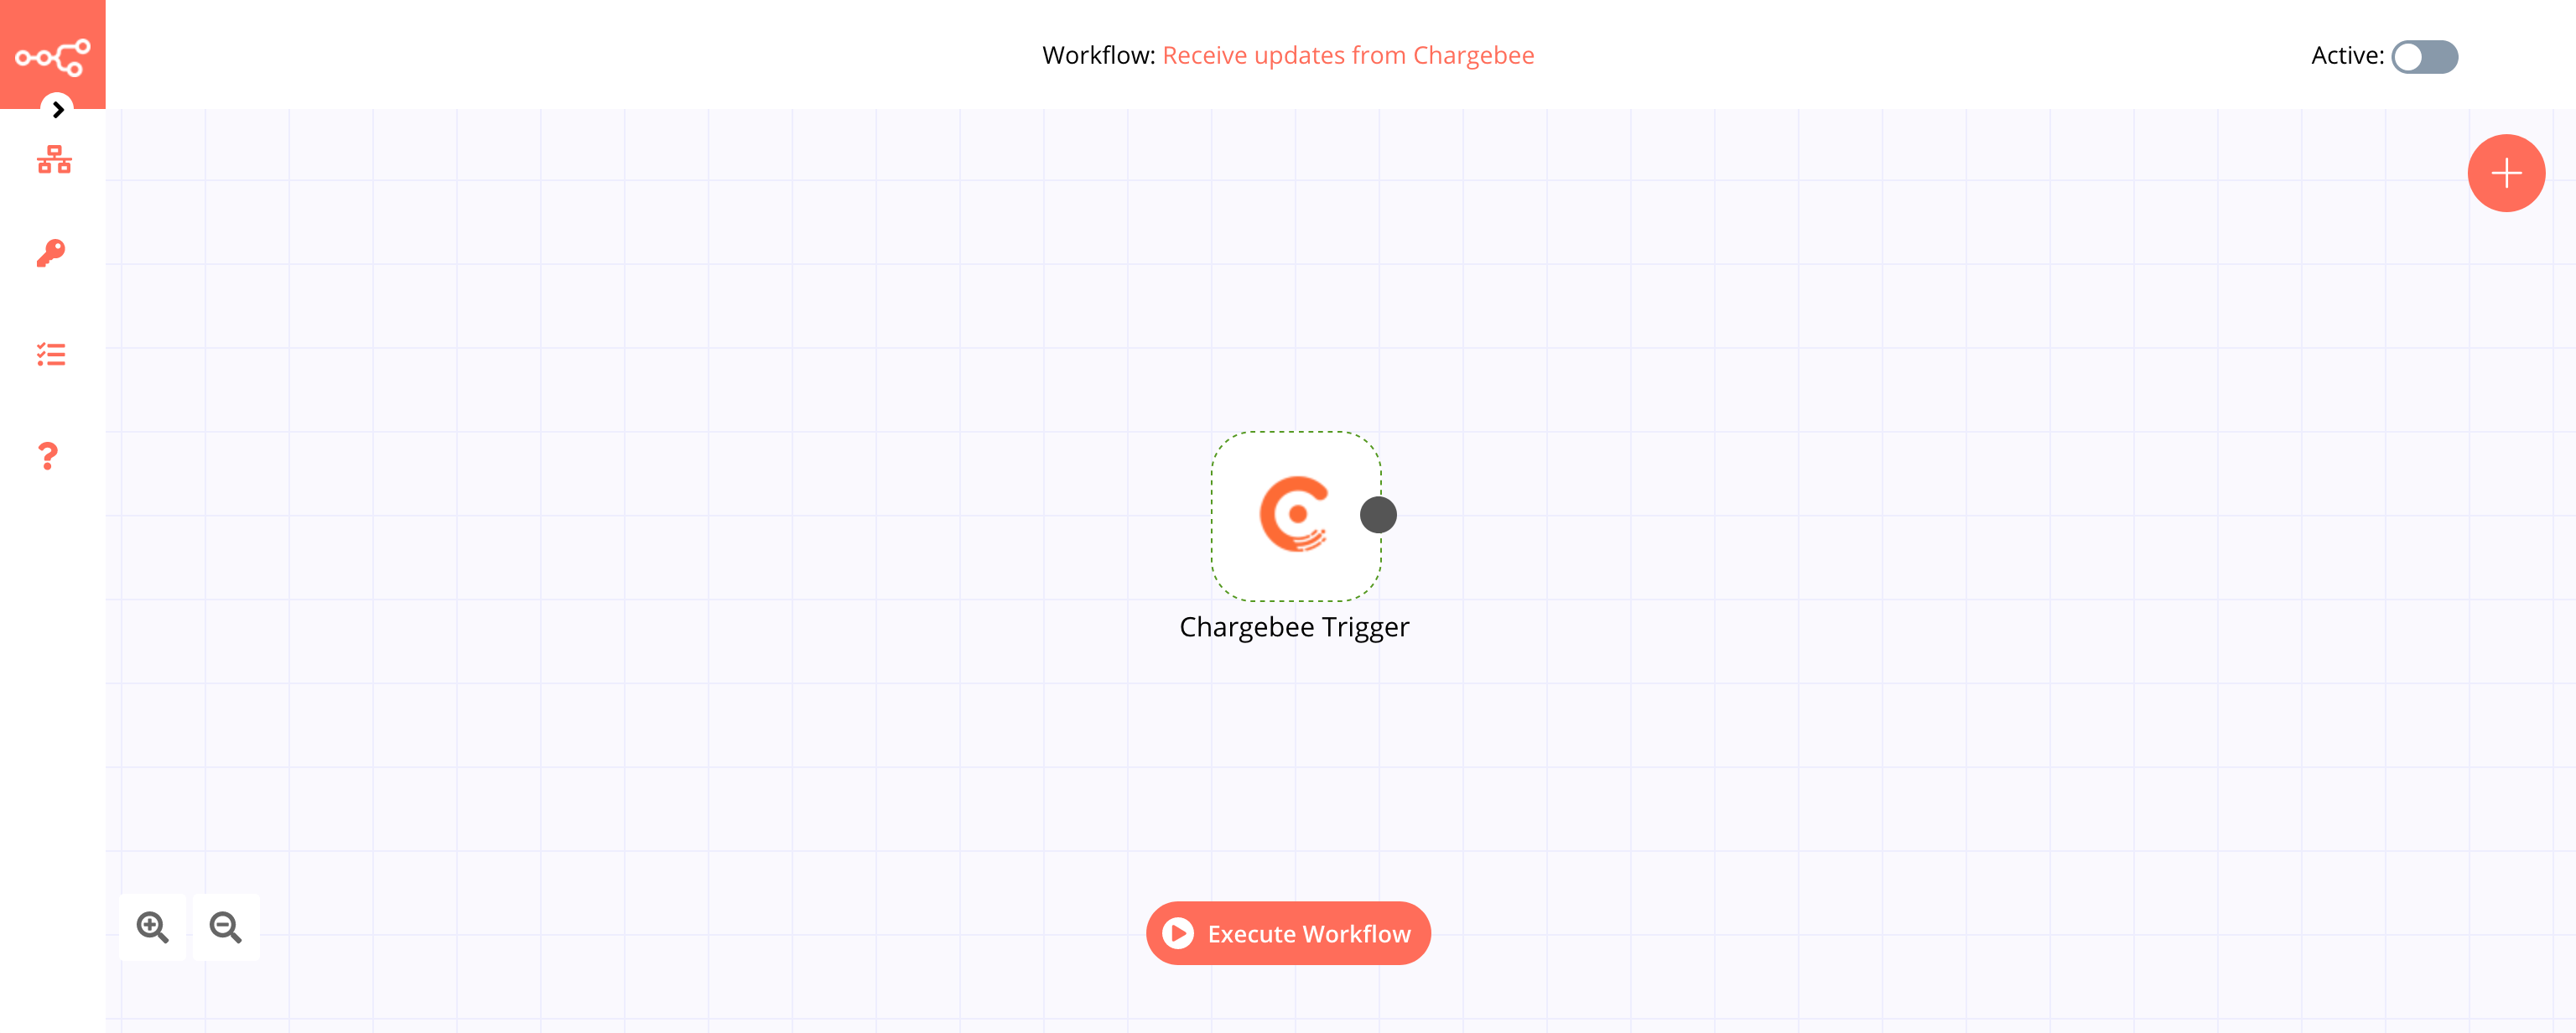 A workflow with the Chargebee Trigger node